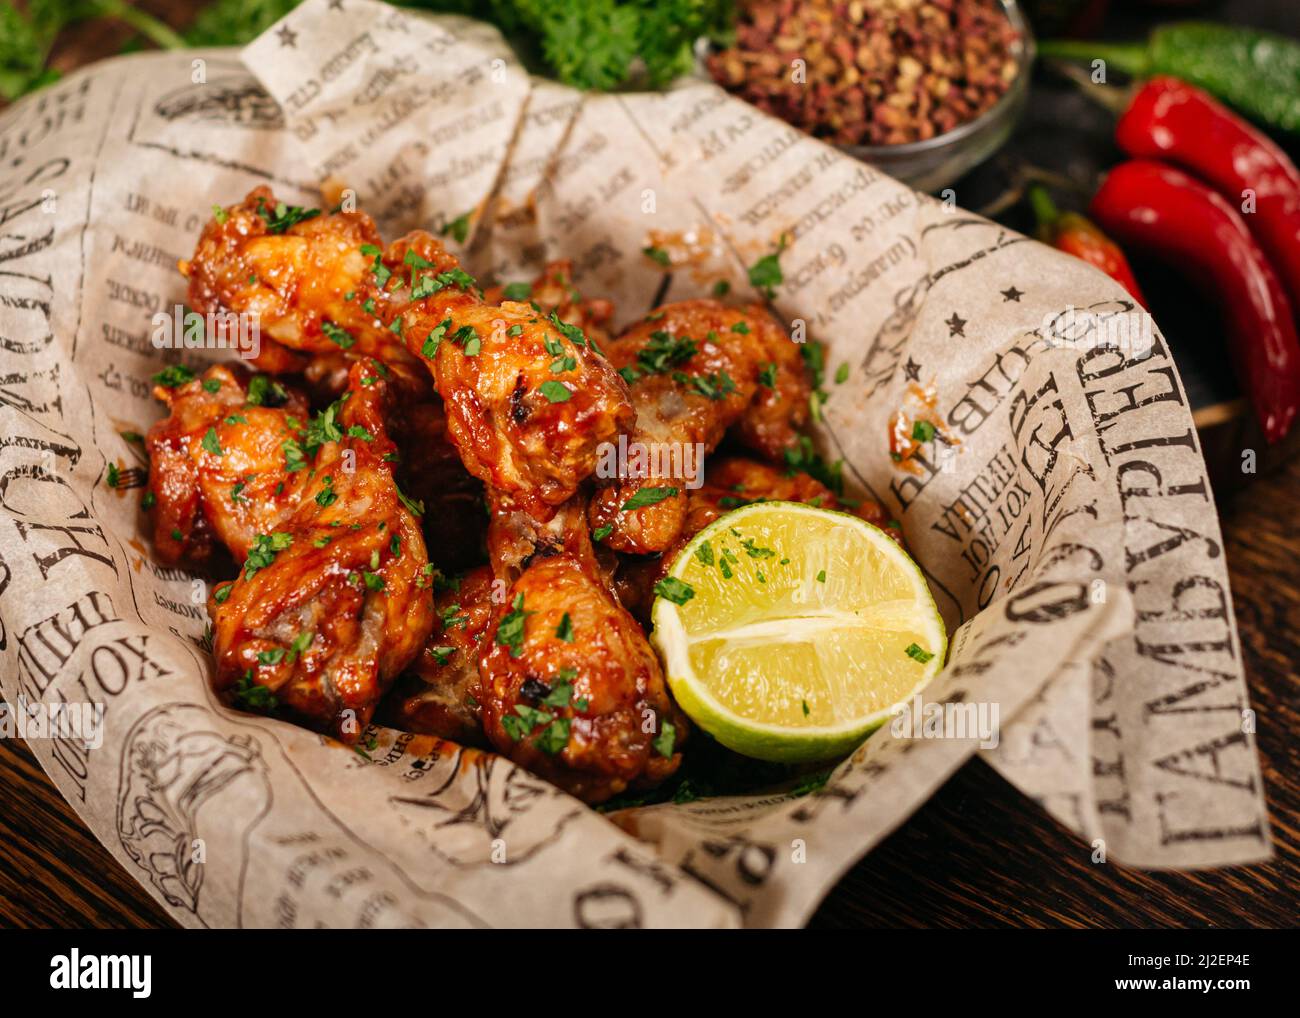 Portion of chicken drumsticks deep fried and in covered in (seasoned with) hot sauce. Served with a half of lime on craft paper. Stock Photo